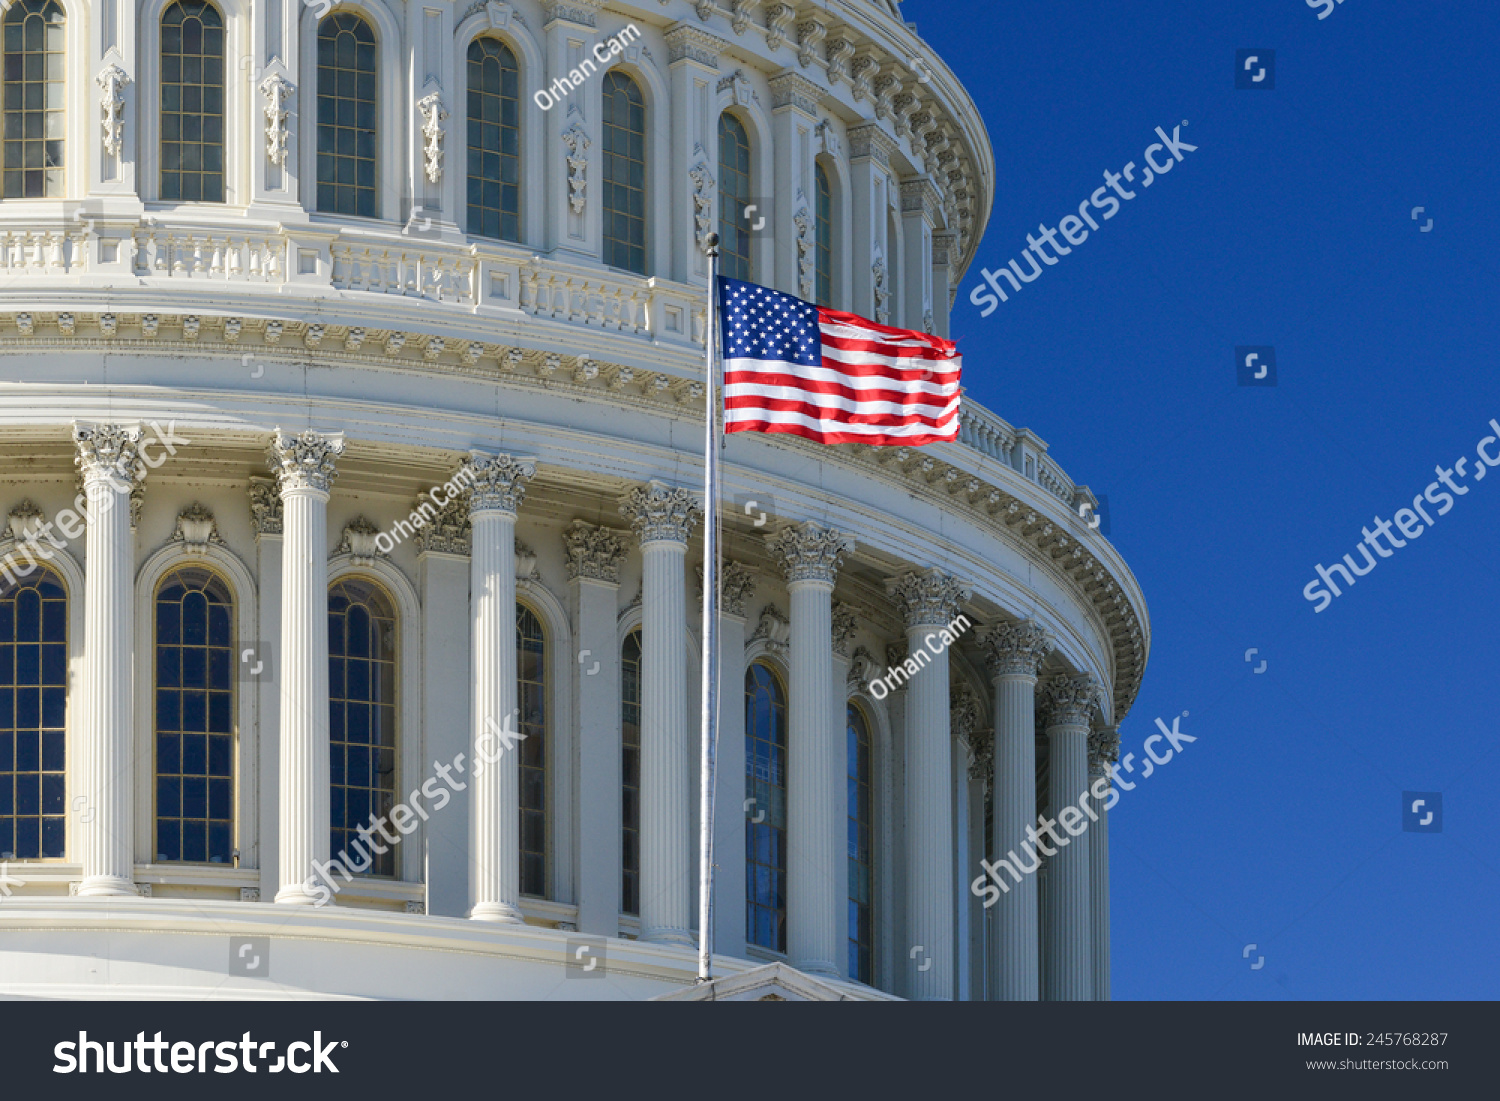 US Capitol Building dome detail with waving national flag - Washington DC, United States of America #245768287